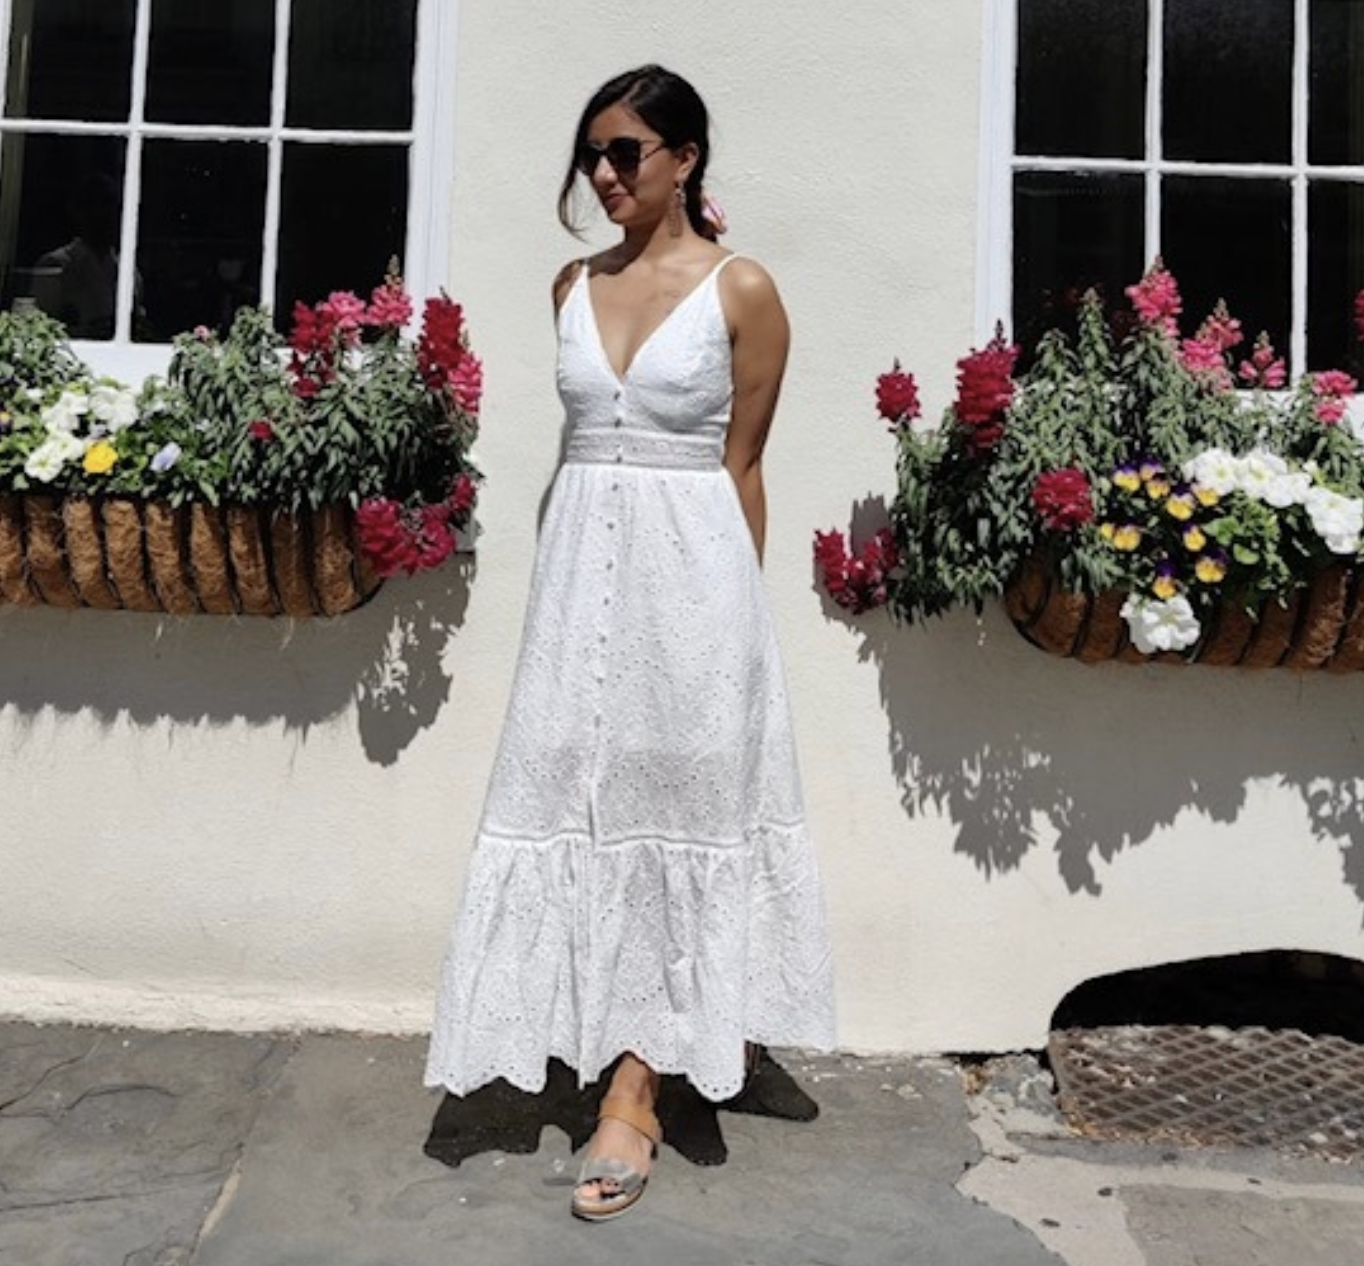 reviewer wearing the white maxi dress